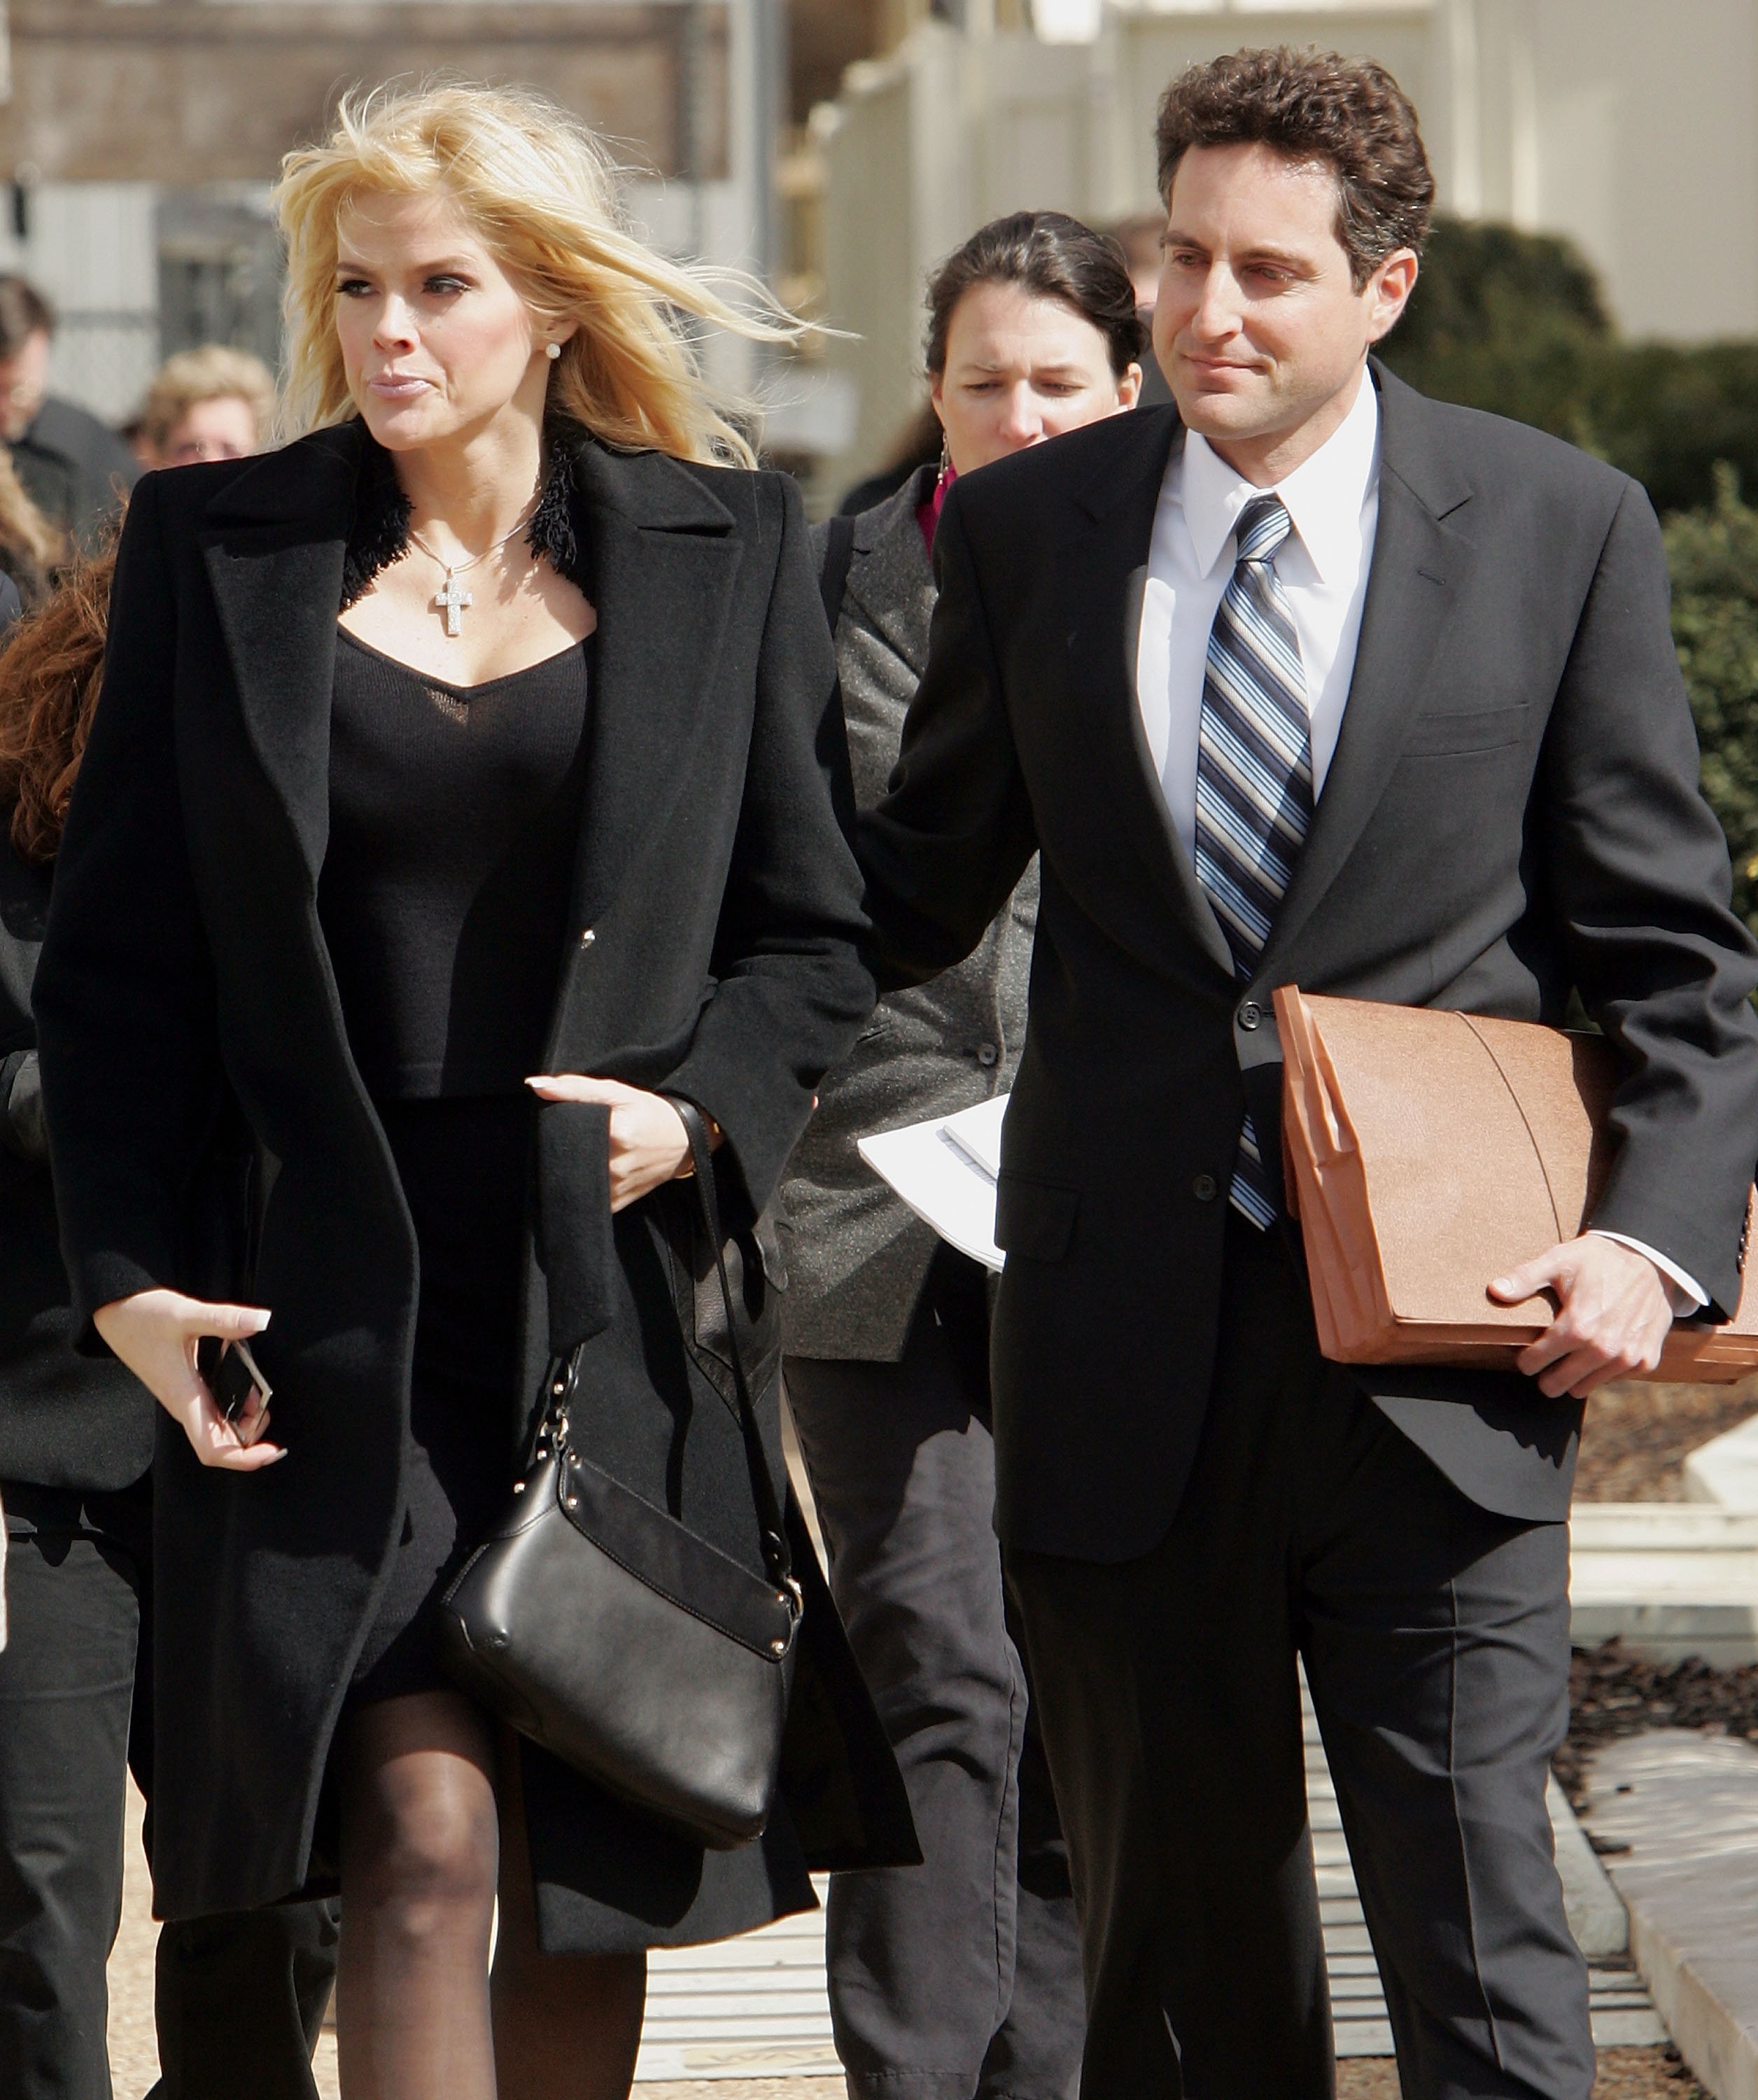 Anna Nicole Smith departs with her attorney, Howard Stern (R), at the U.S. Supreme Court February 28, 2006 in Washington DC.| Source: Getty Images